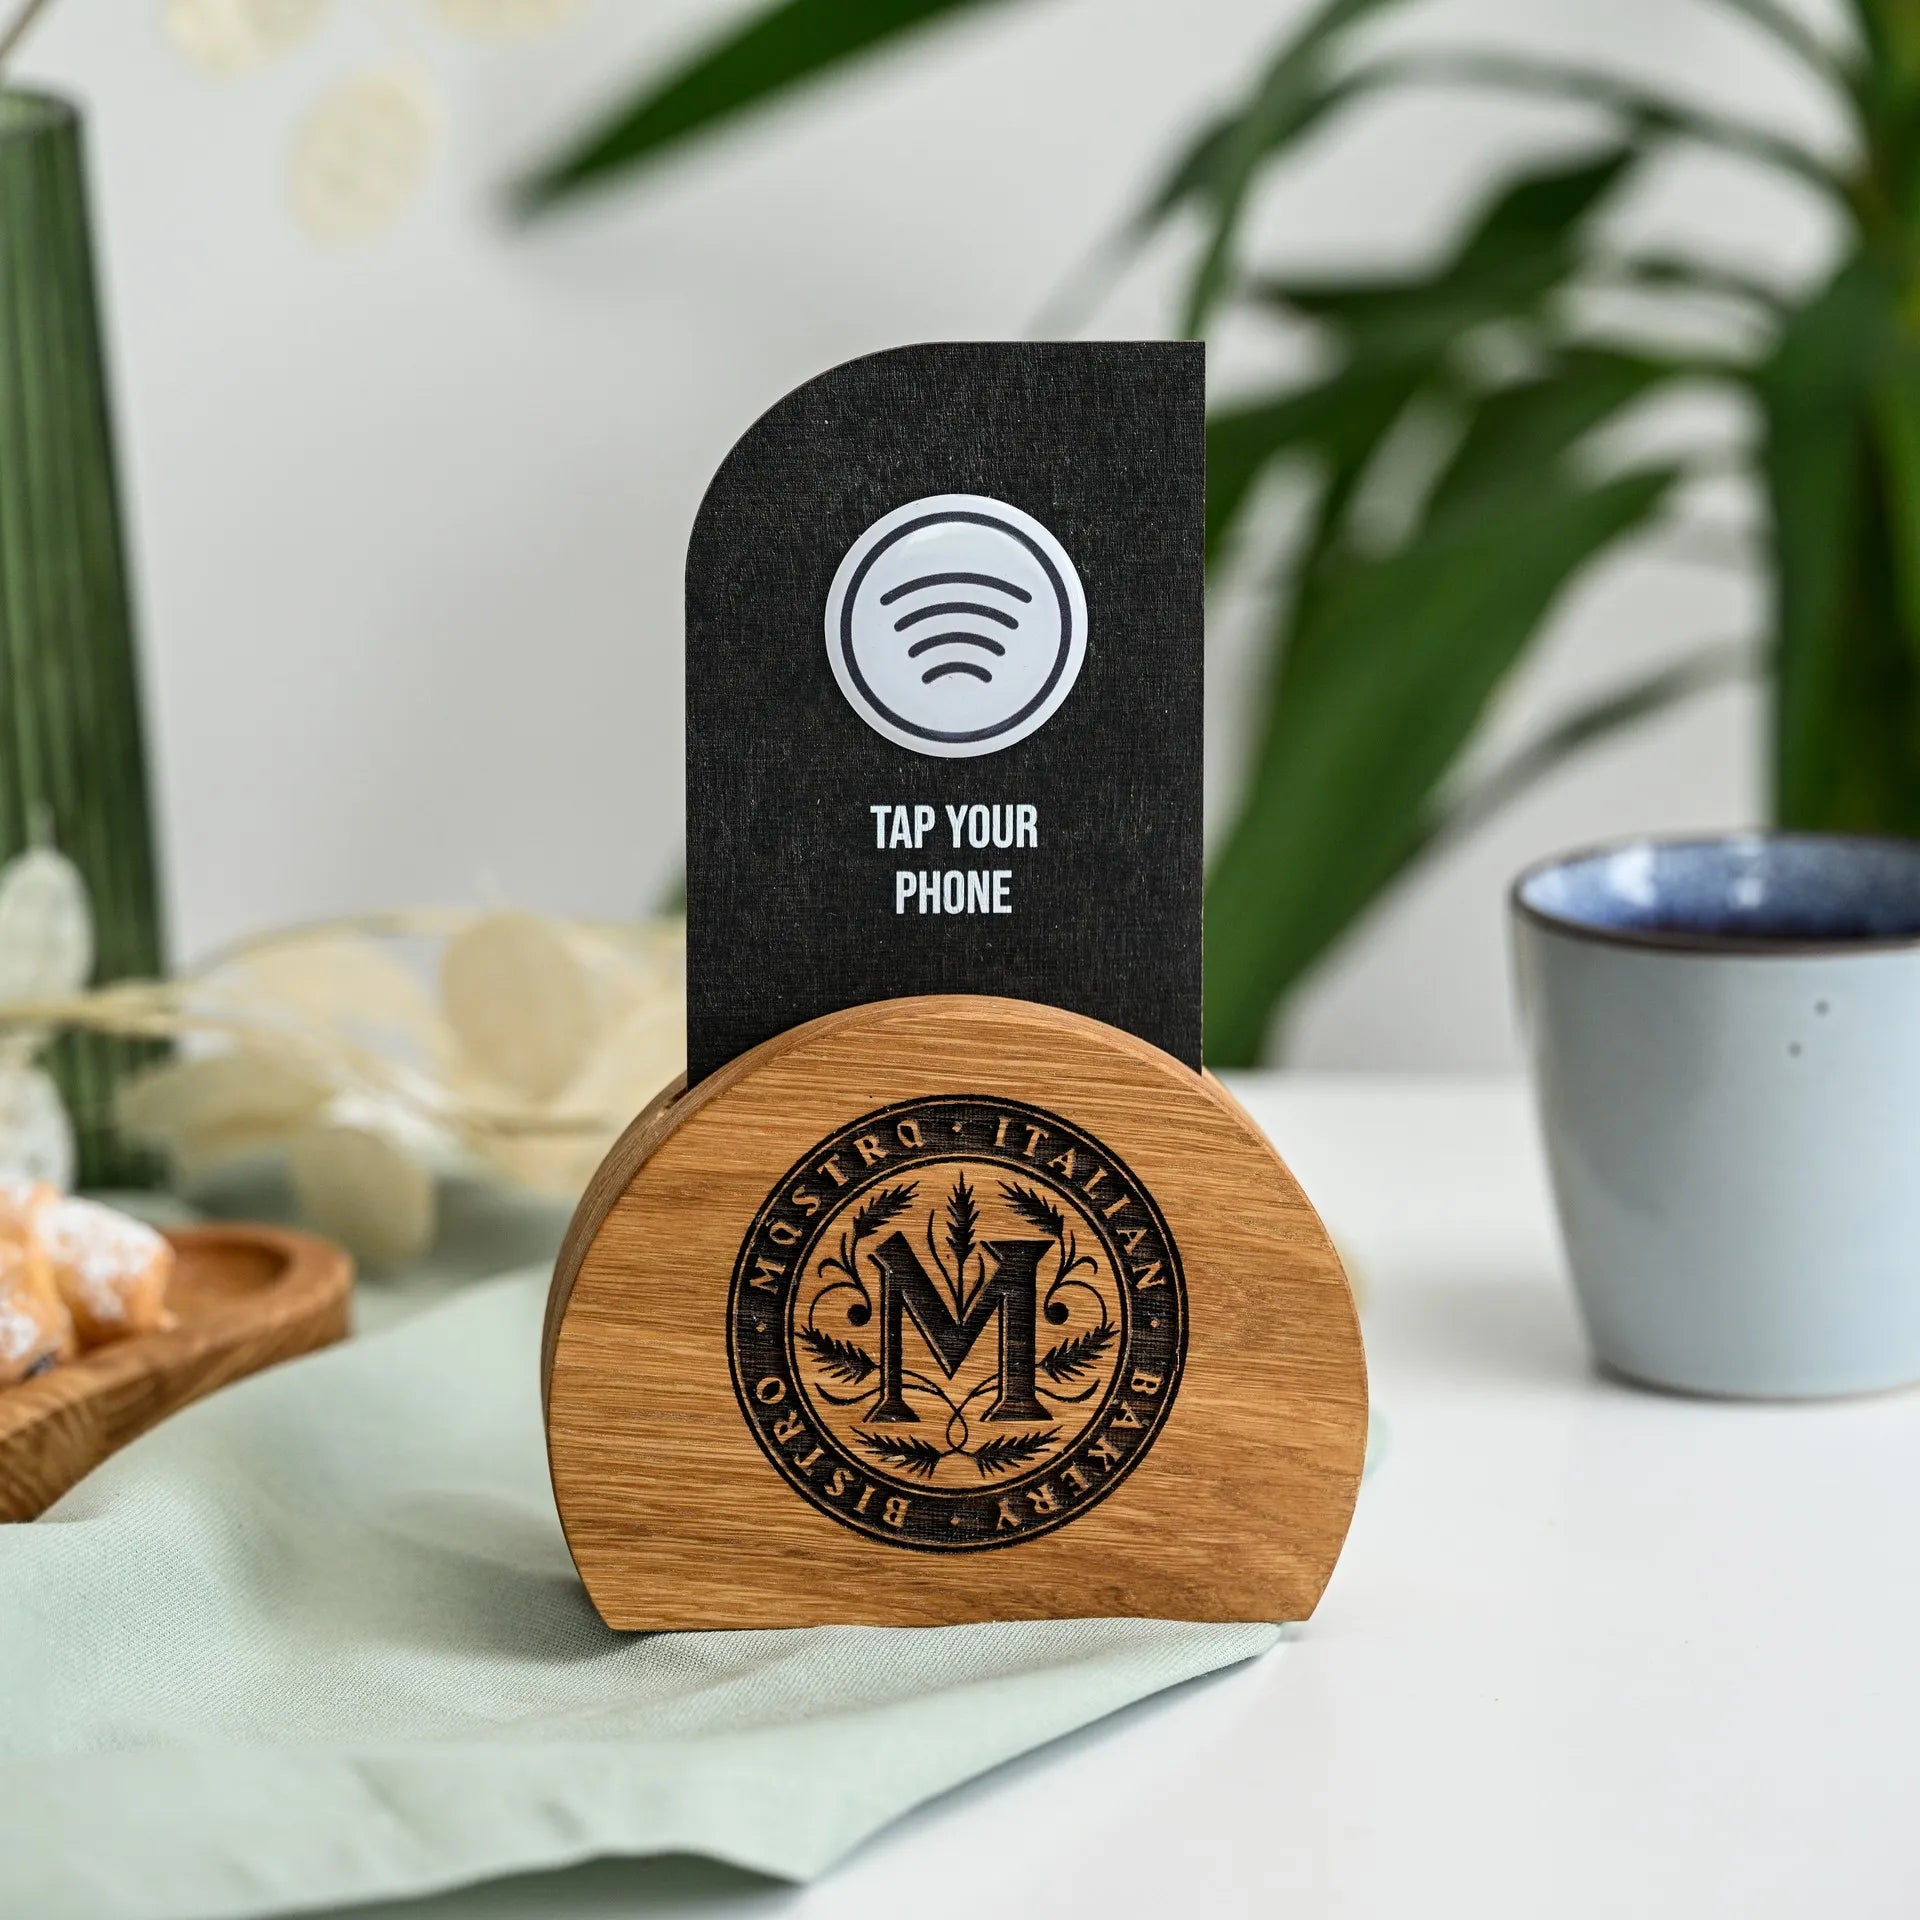 Elevate your dining experience with our NFC tag and QR code sign on a stylish wooden stand, offering seamless interaction and information access.